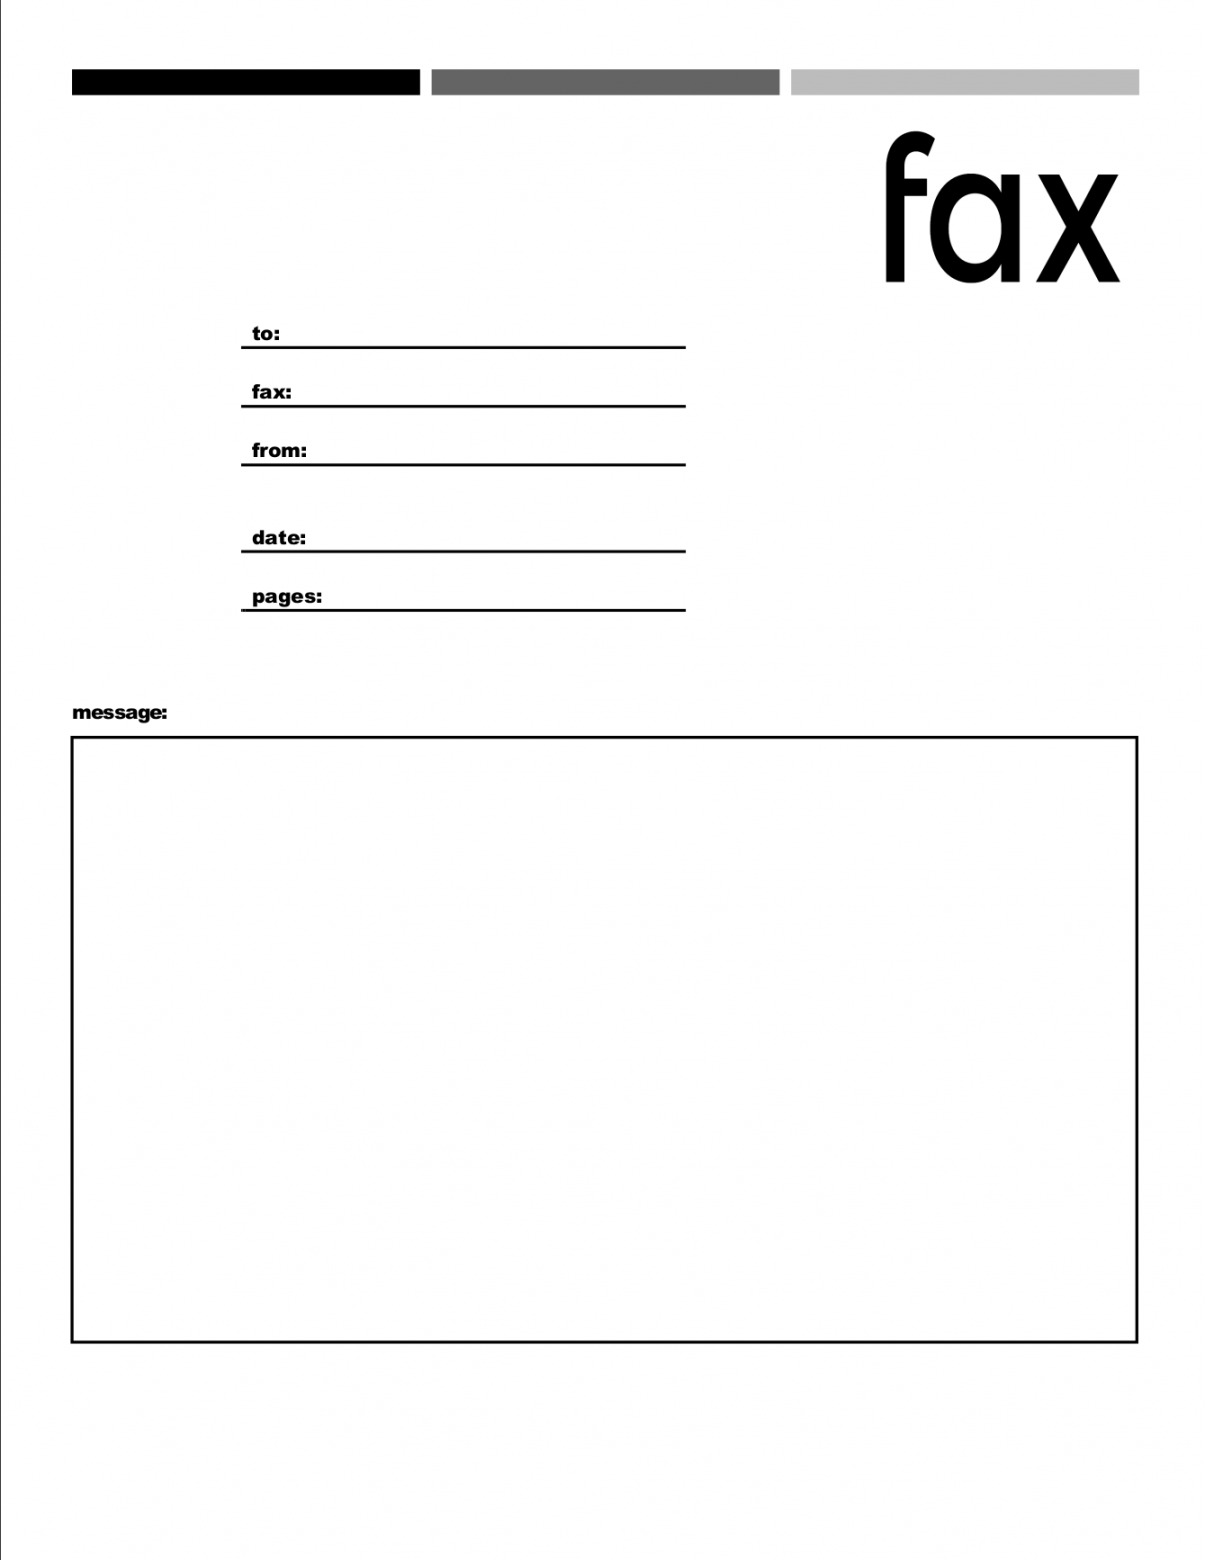 Fax Cover Sheets Free Printable - Printable - Free Fax Cover Sheets  FaxBurner